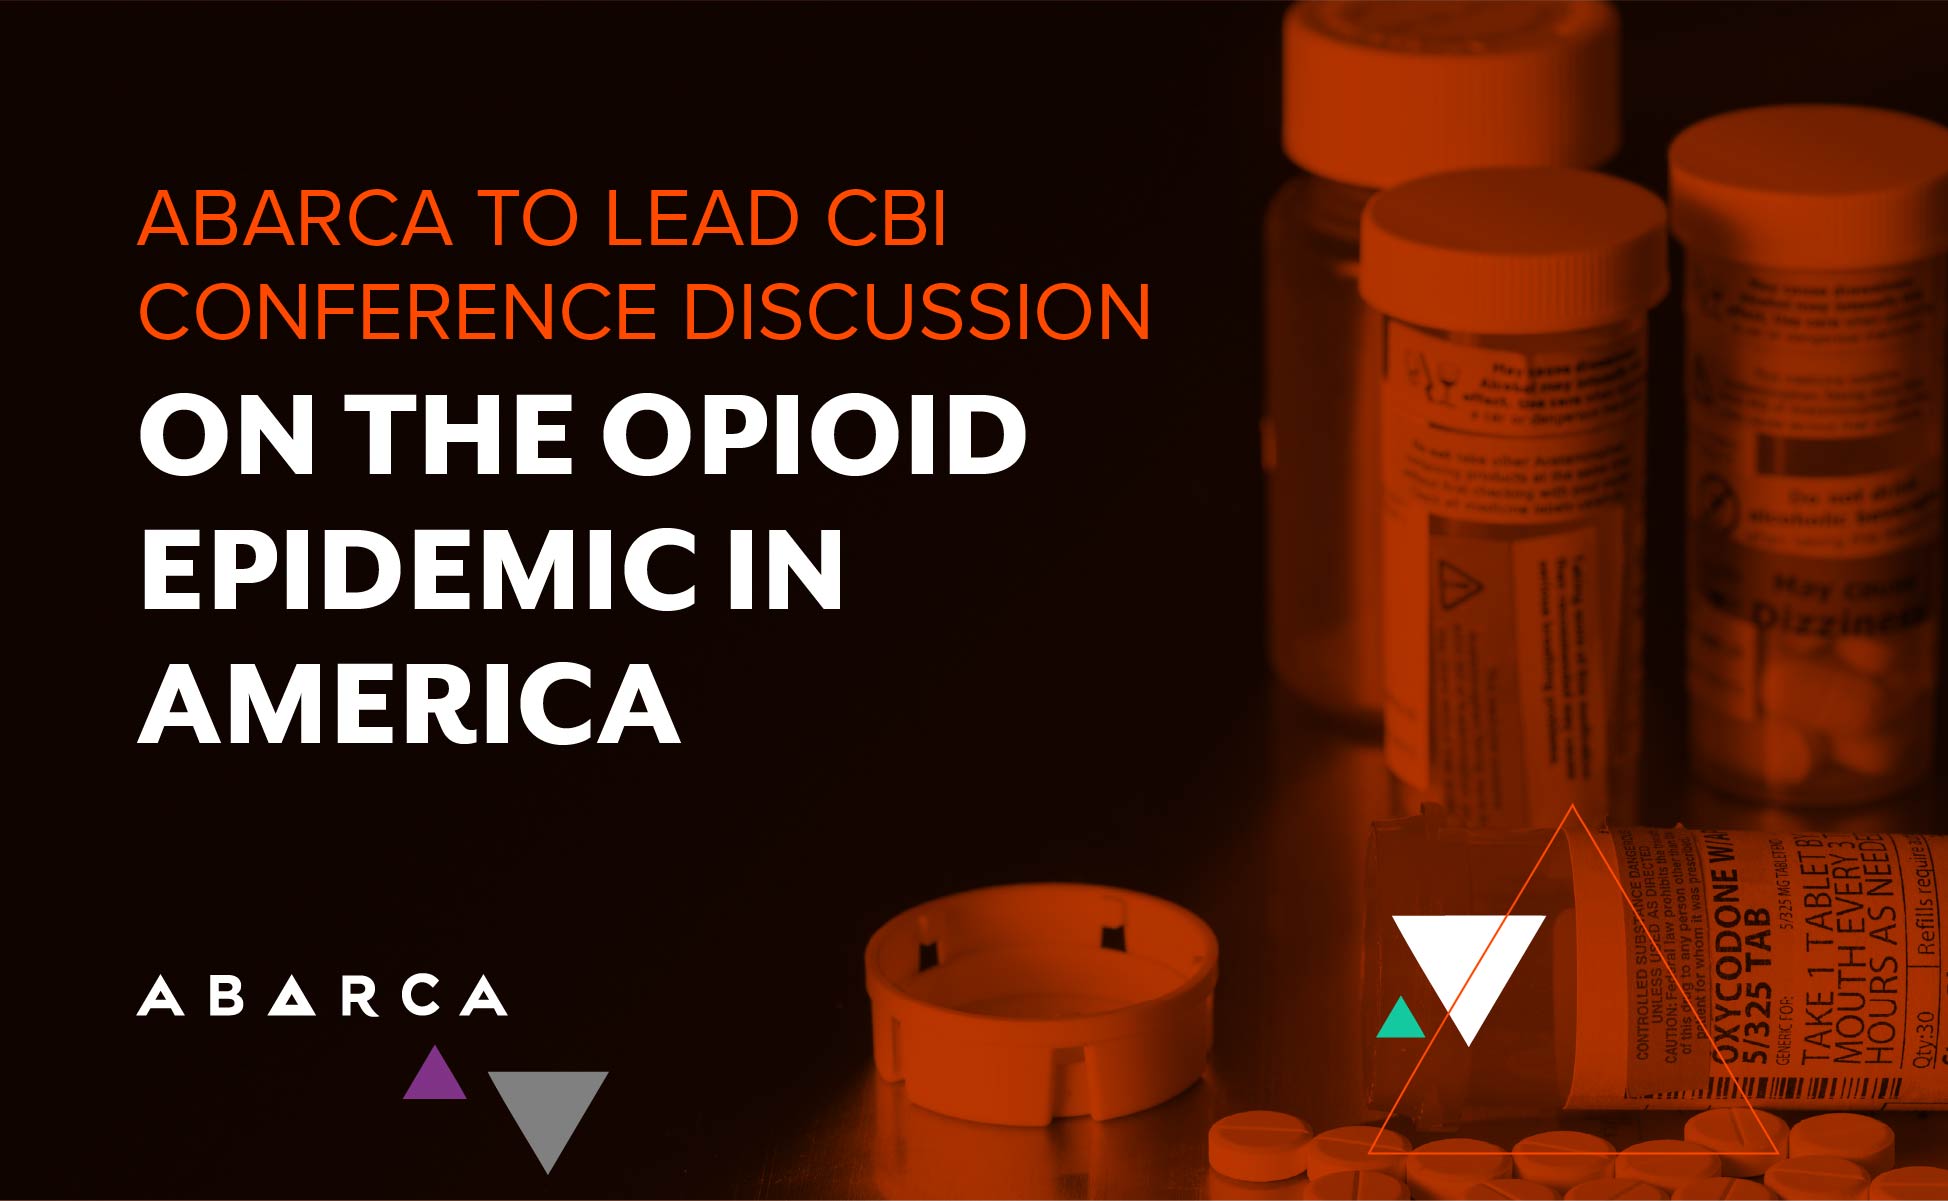 Abarca Health to Lead CBI Conference Discussion on the Opioid Epidemic in America